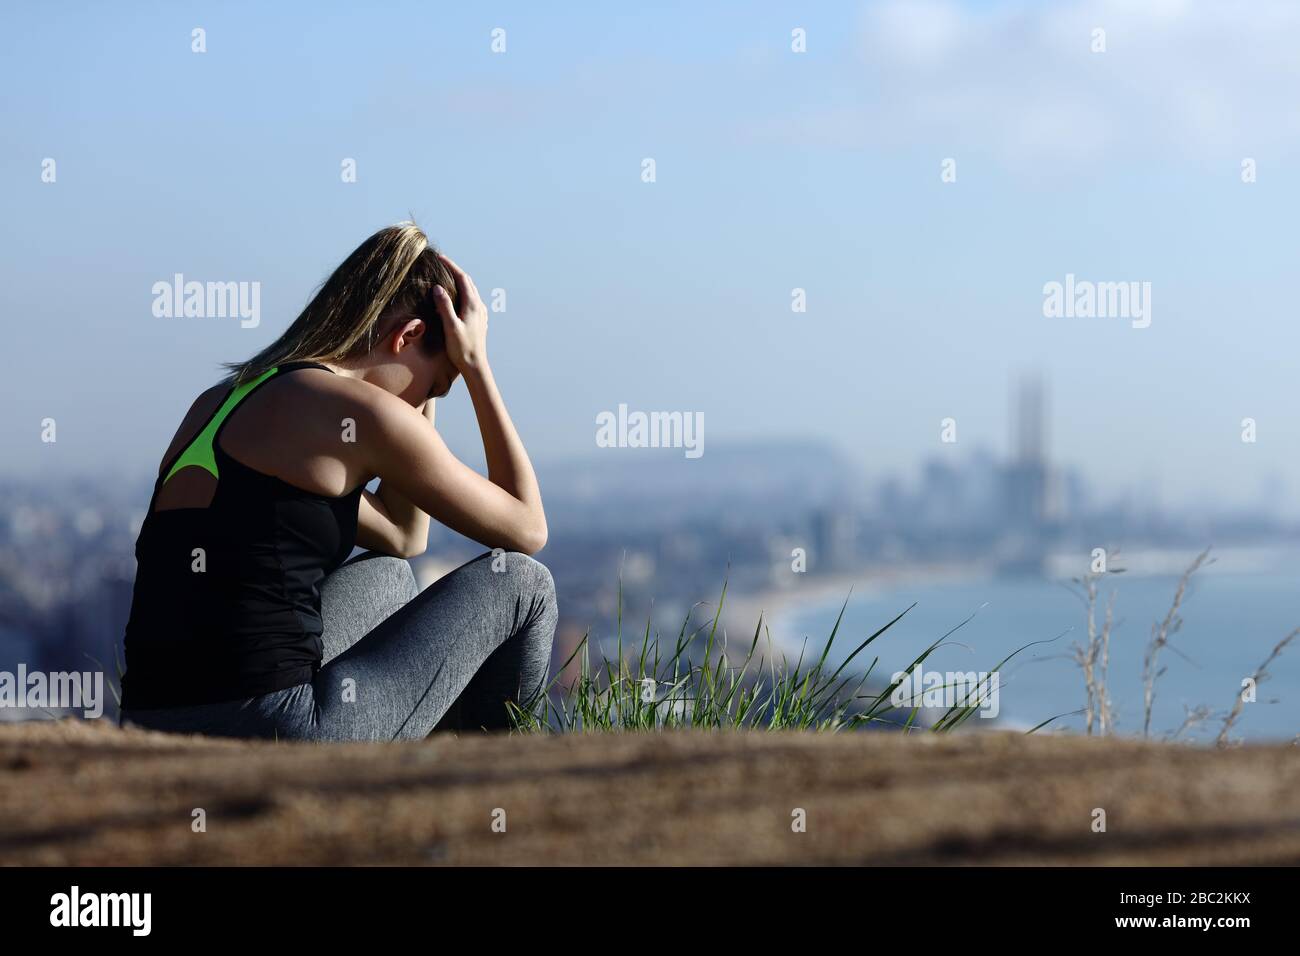 Sad runner complaining sitting alone in city outskirts Stock Photo